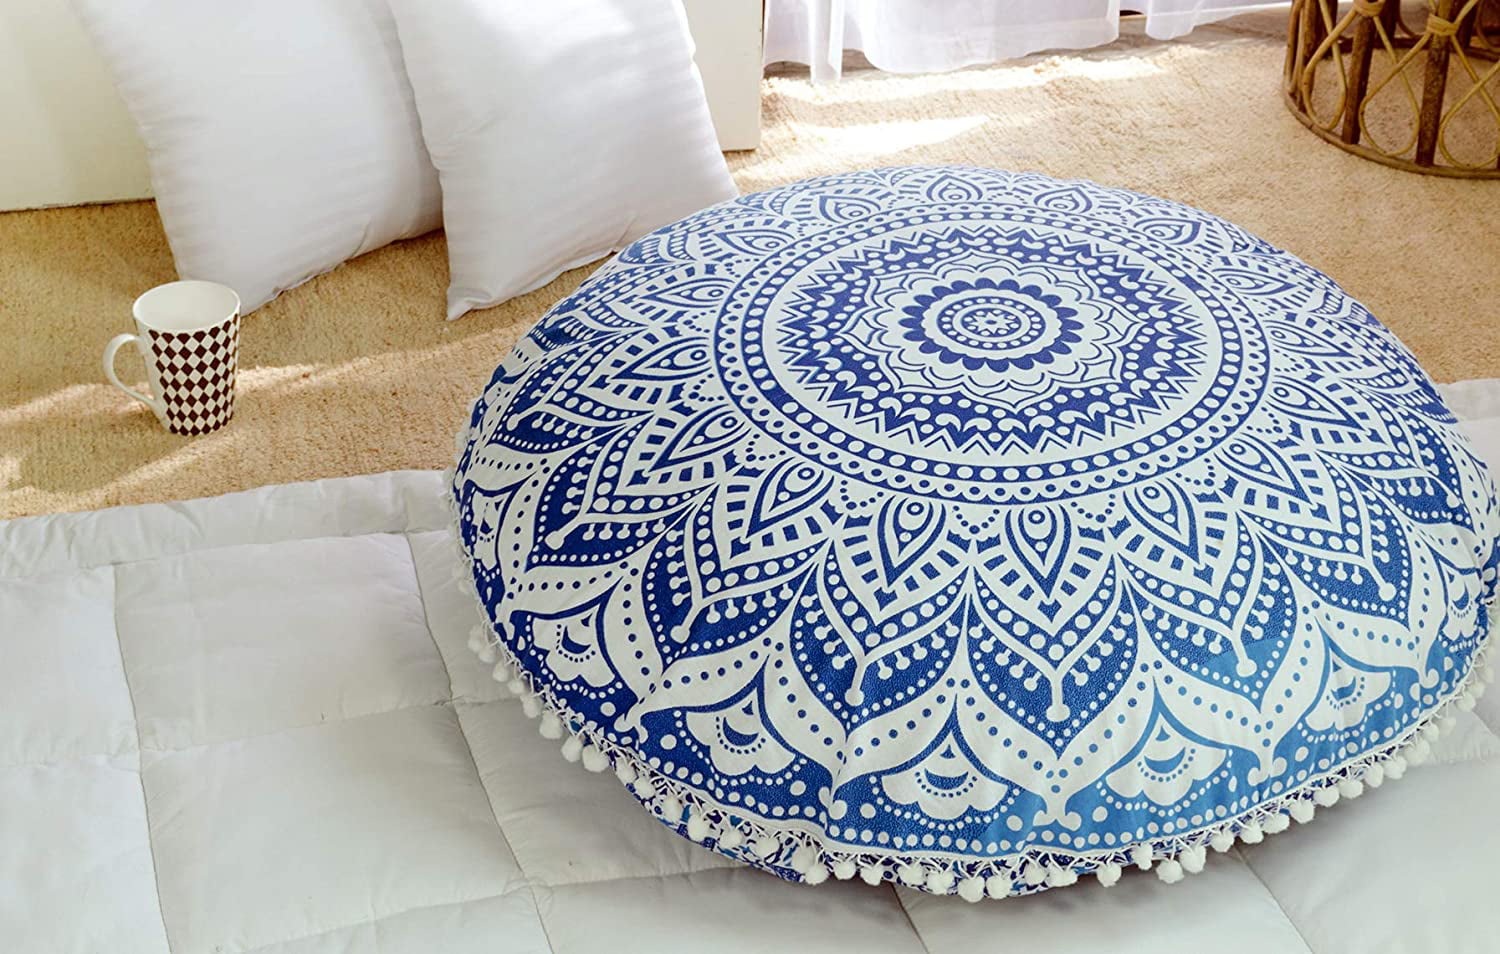 OMBRE MANDALA ROUND FLOOR OTTOMAN POUF GOLD COLORED PILLOW COVER INDIAN DECOR 